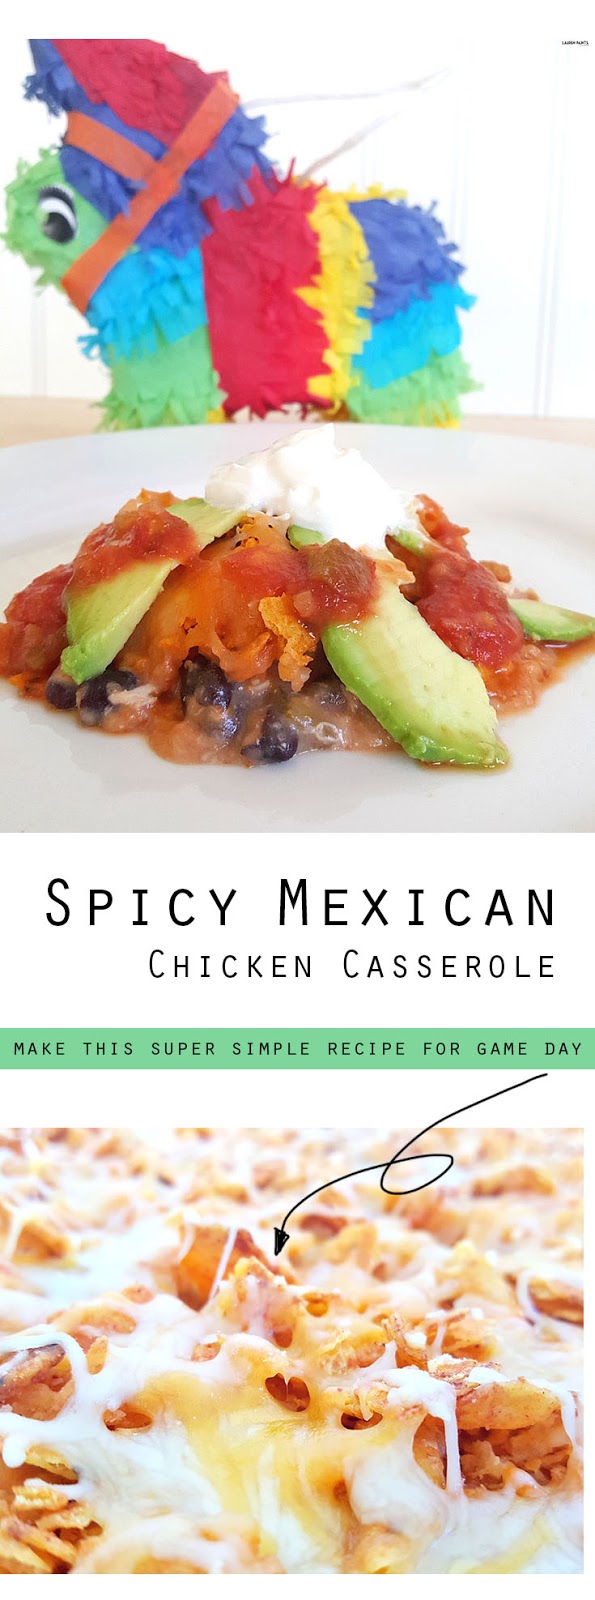 Want to try something different this football season? Make this delicious (and easy to prep) Spicy Mexican Chicken Casserole for game day! #KickUpTheFlavor